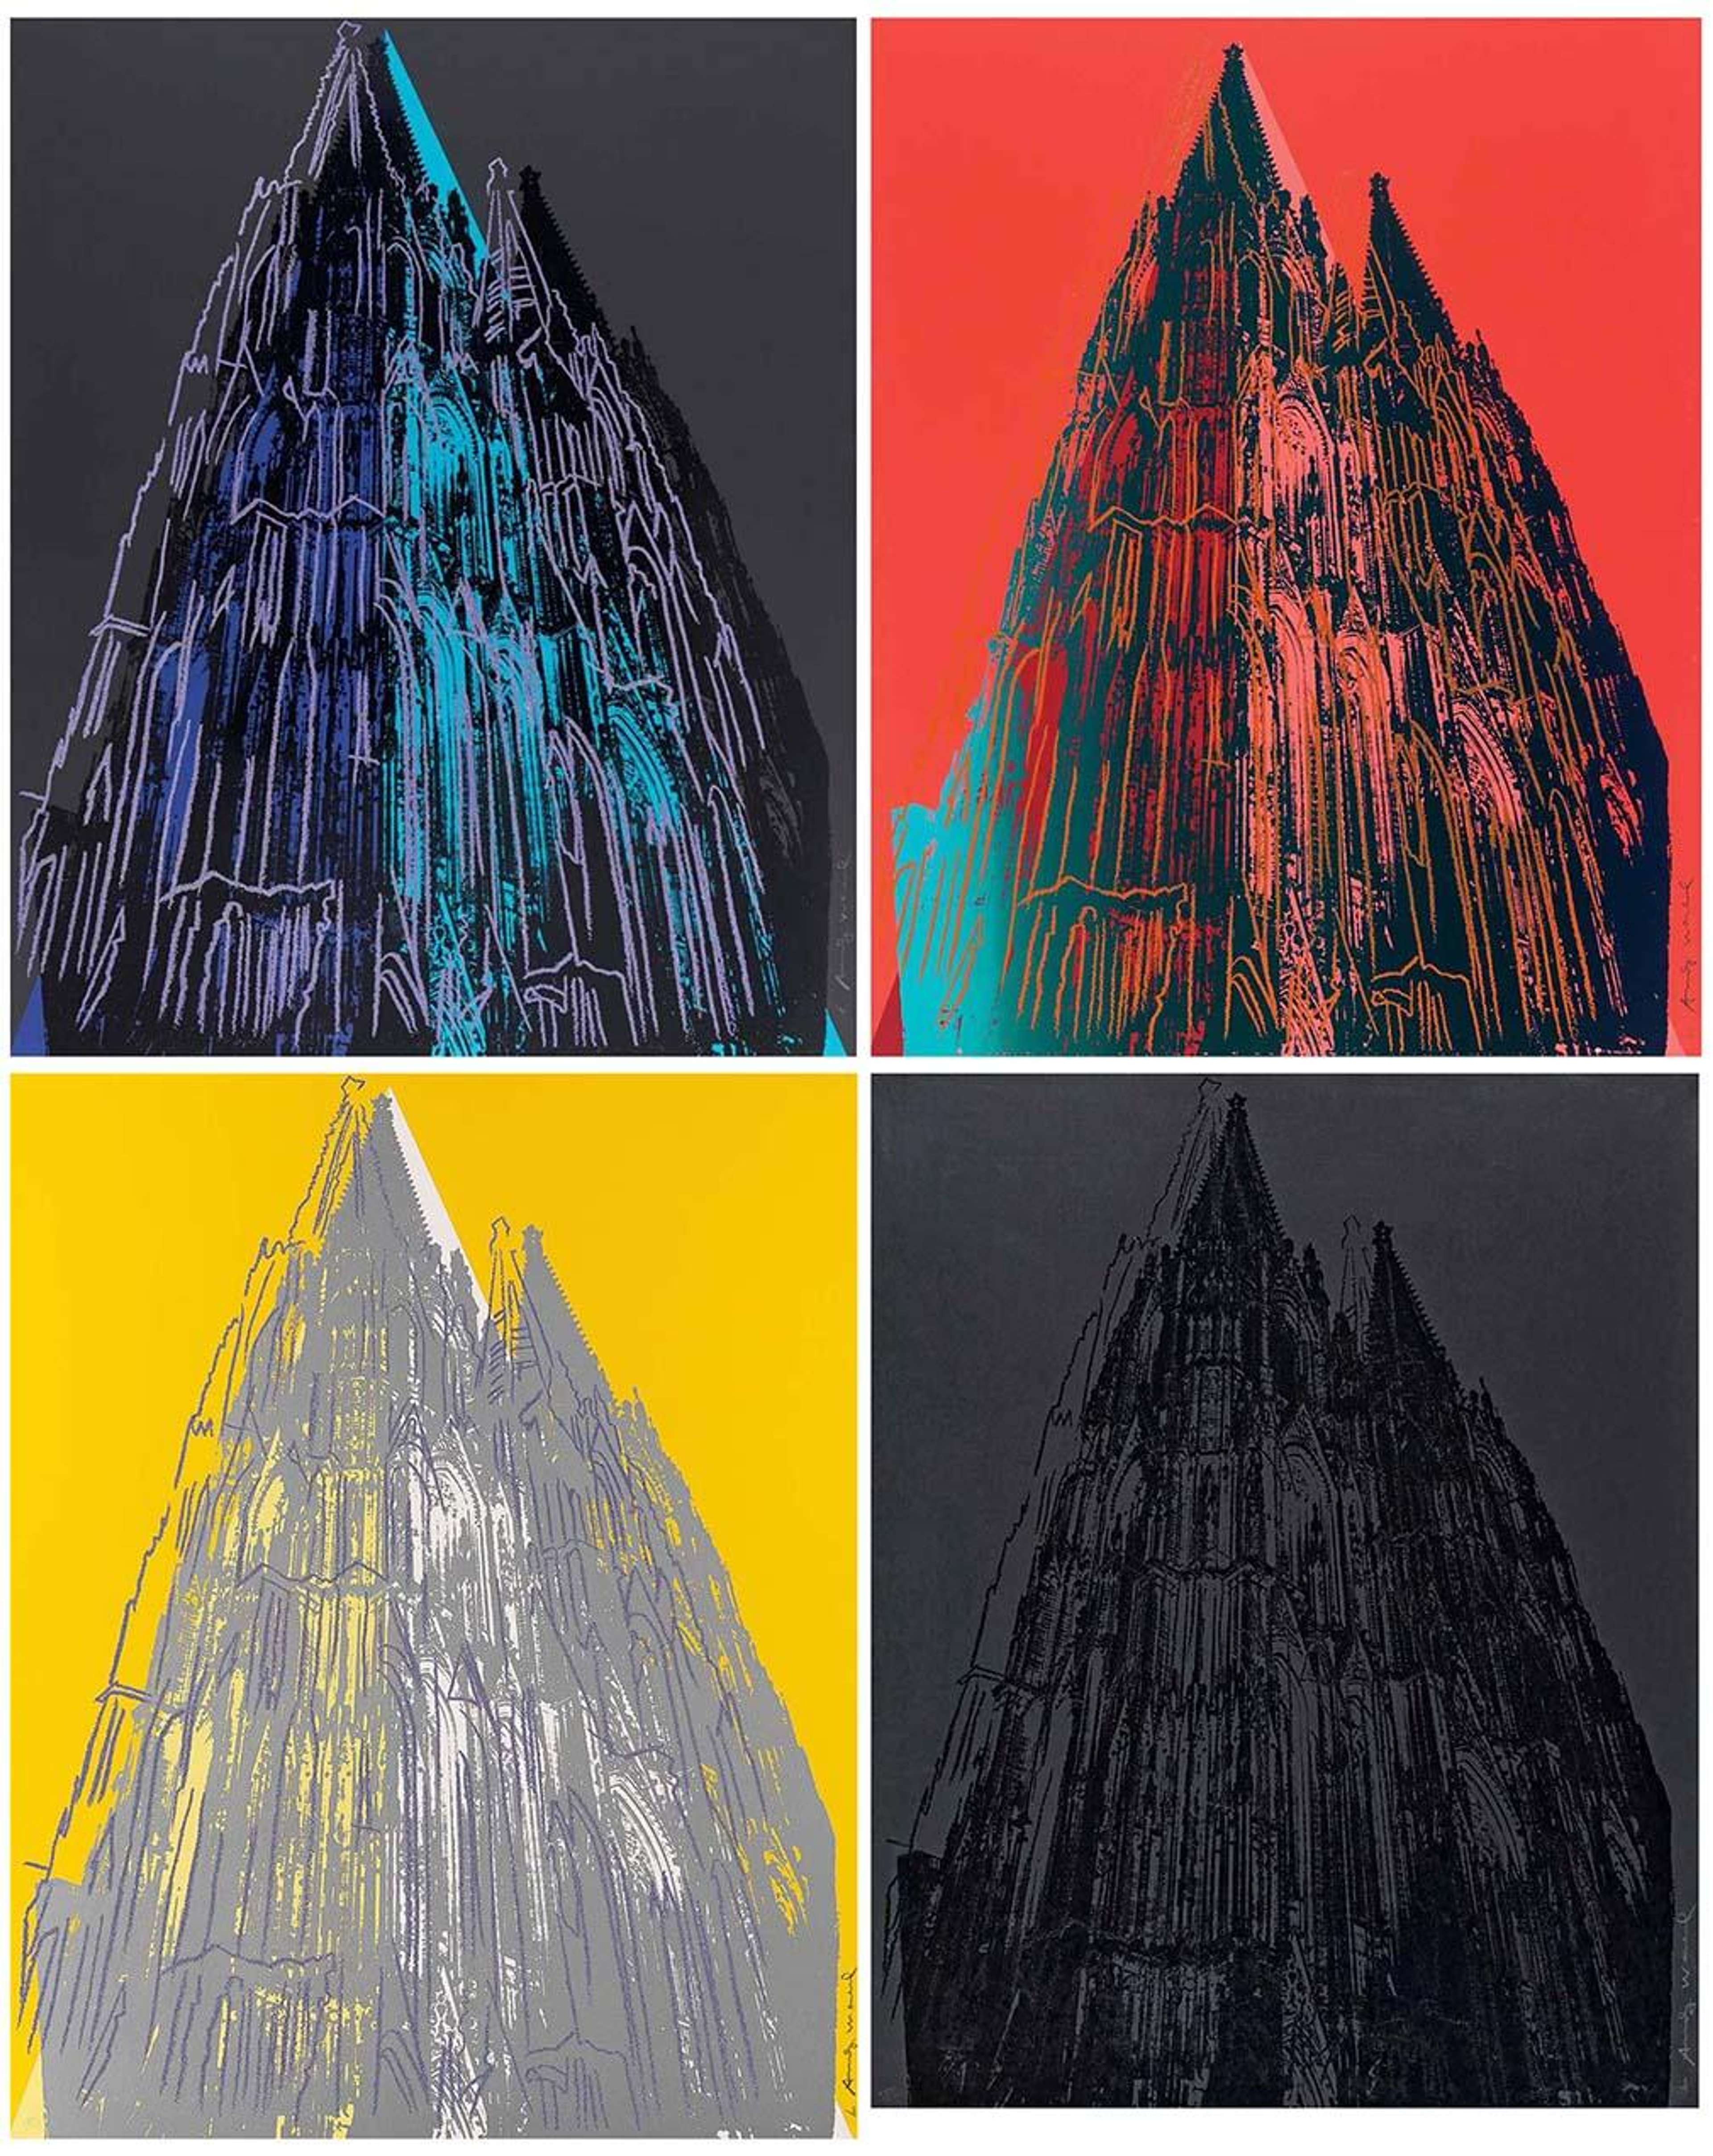 In this print Warhol renders the iconic Cologne Cathedral in an unconventional graphic style. Against colourful backdrop, Warhol prints an image of the cathedral in contrasting colours. Warhol uses crayon-like lines to add detail to the print, however the artist simplifies the details of the Gothic architecture significantly through the printing process.